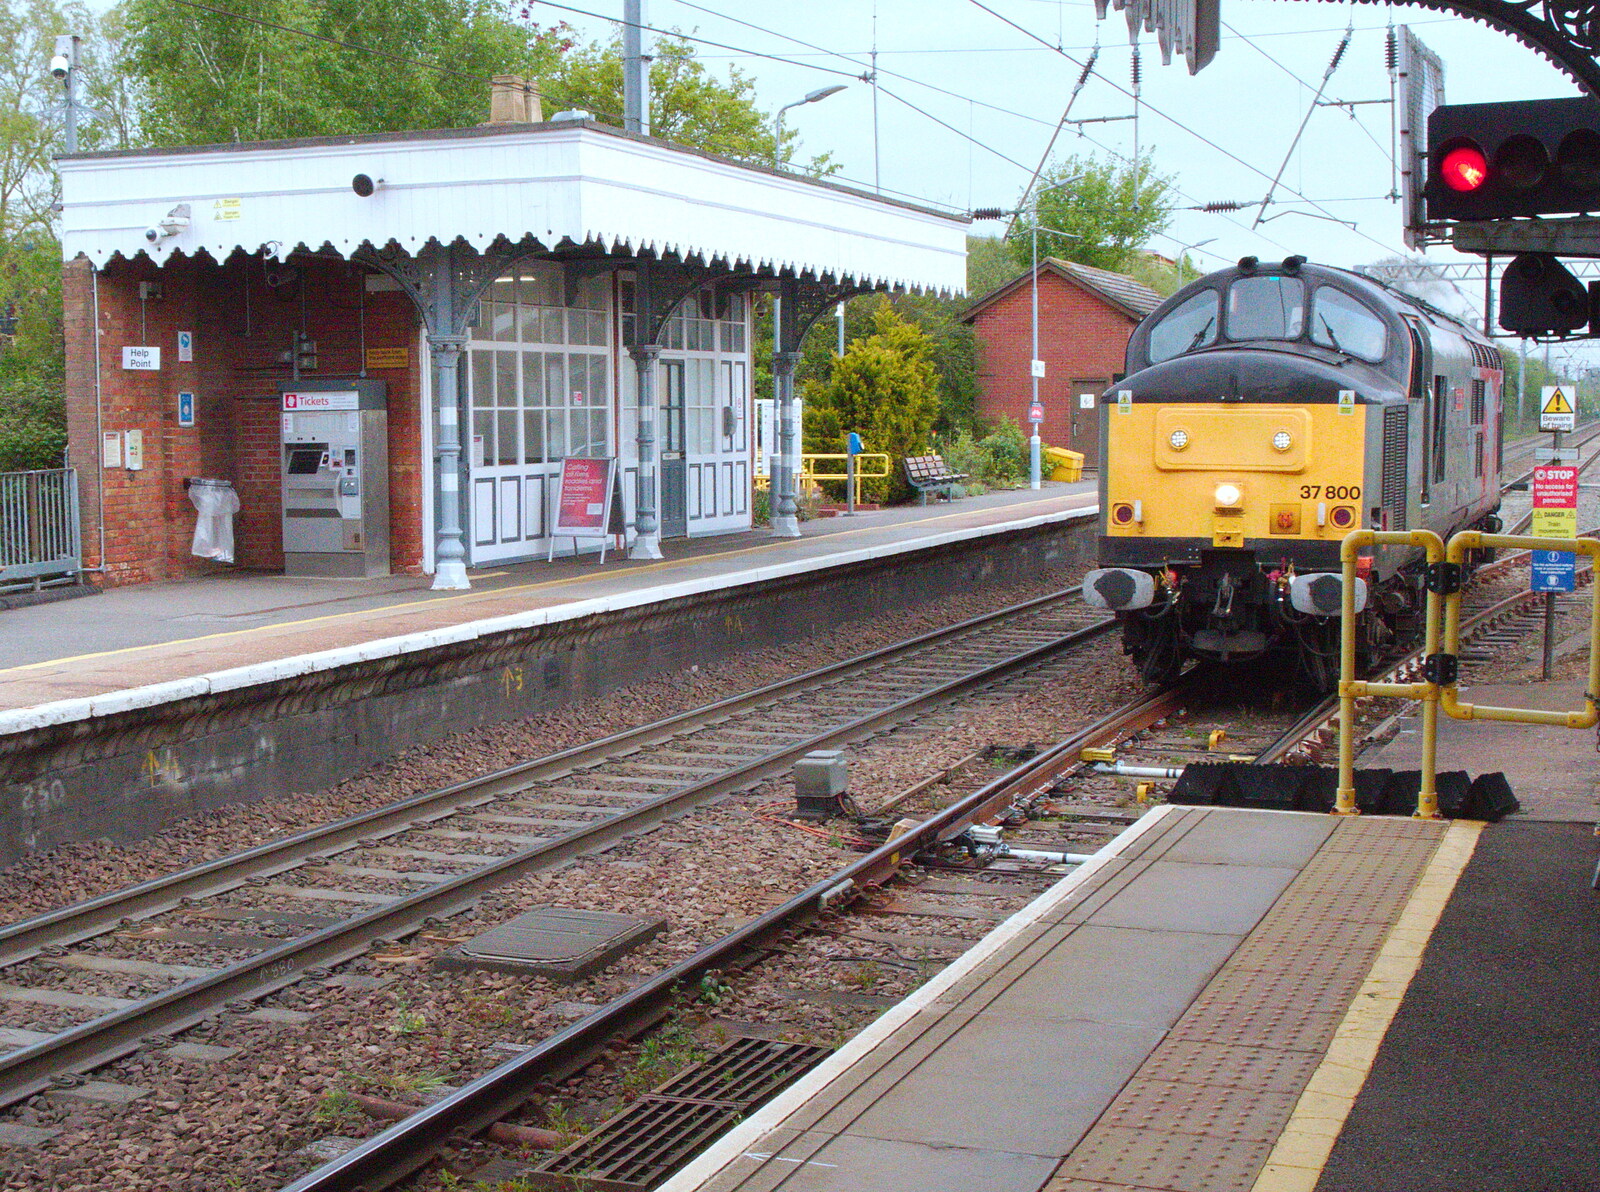 The BSCC at Pulham Market and Hopton, and Lunch in Paddington - 21st May 2019: Class 37 loco 37800 rumbles through Diss station